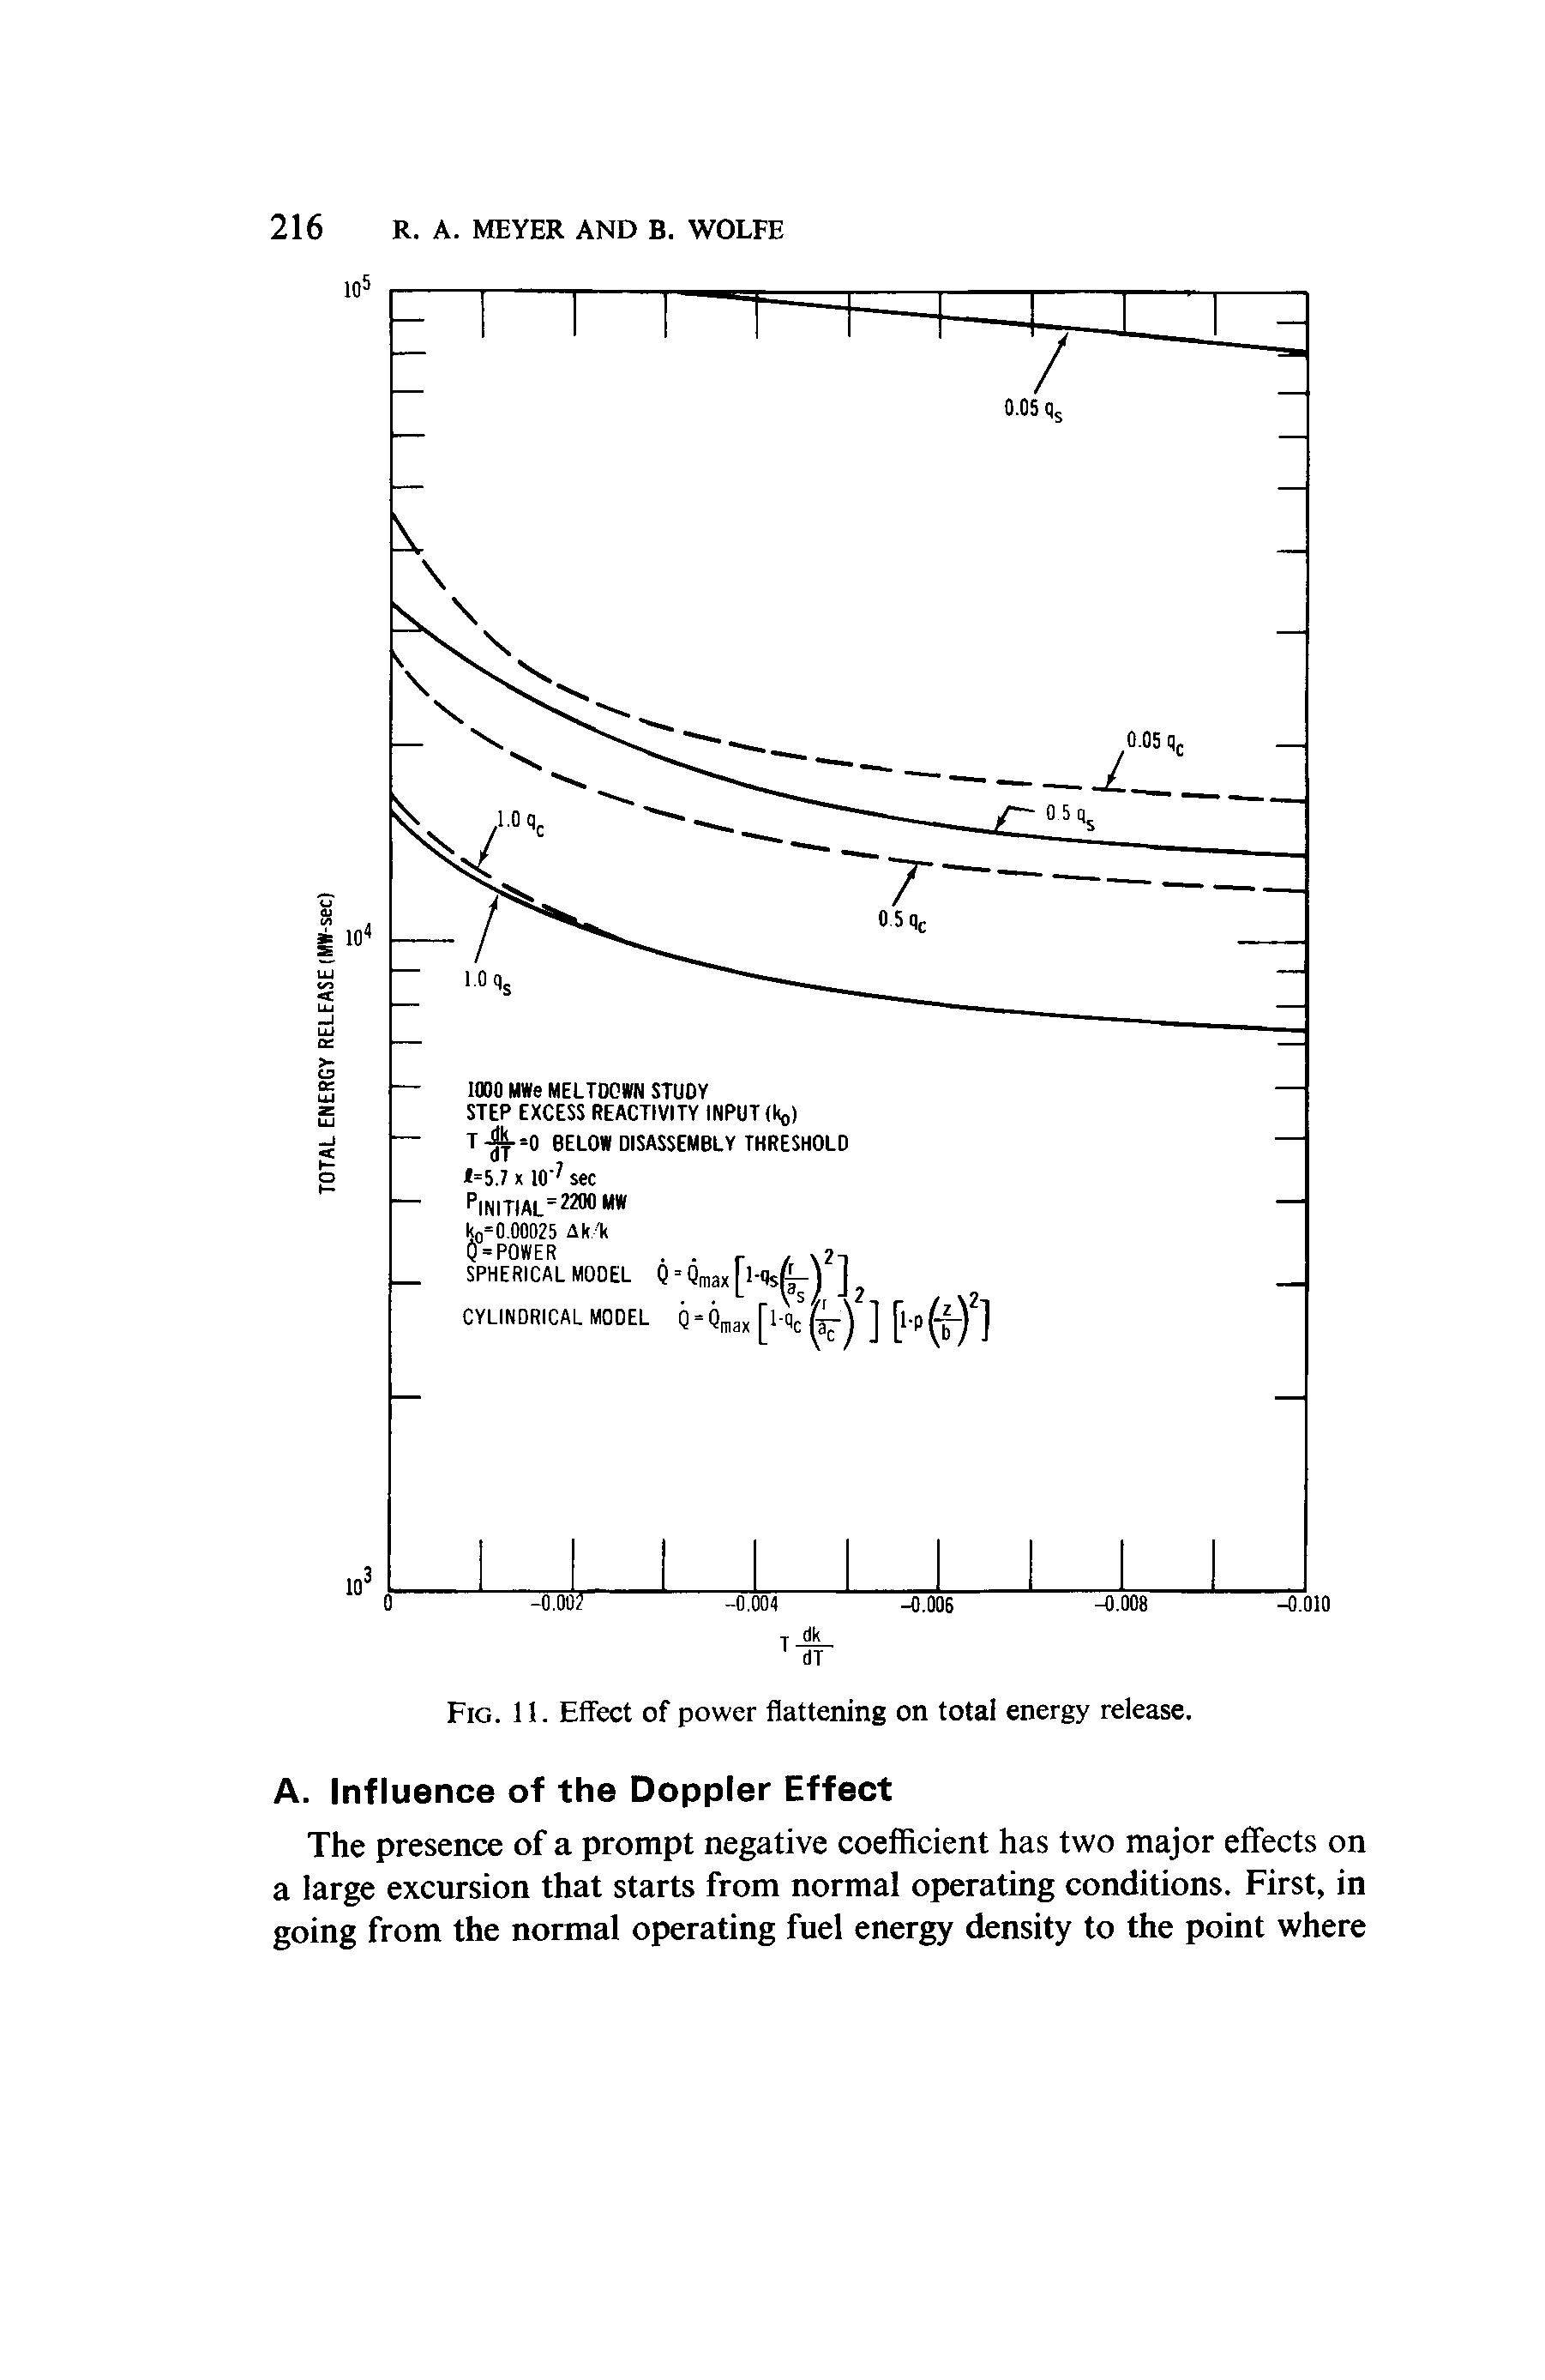 Fig. 11. Effect of power flattening on total energy release.